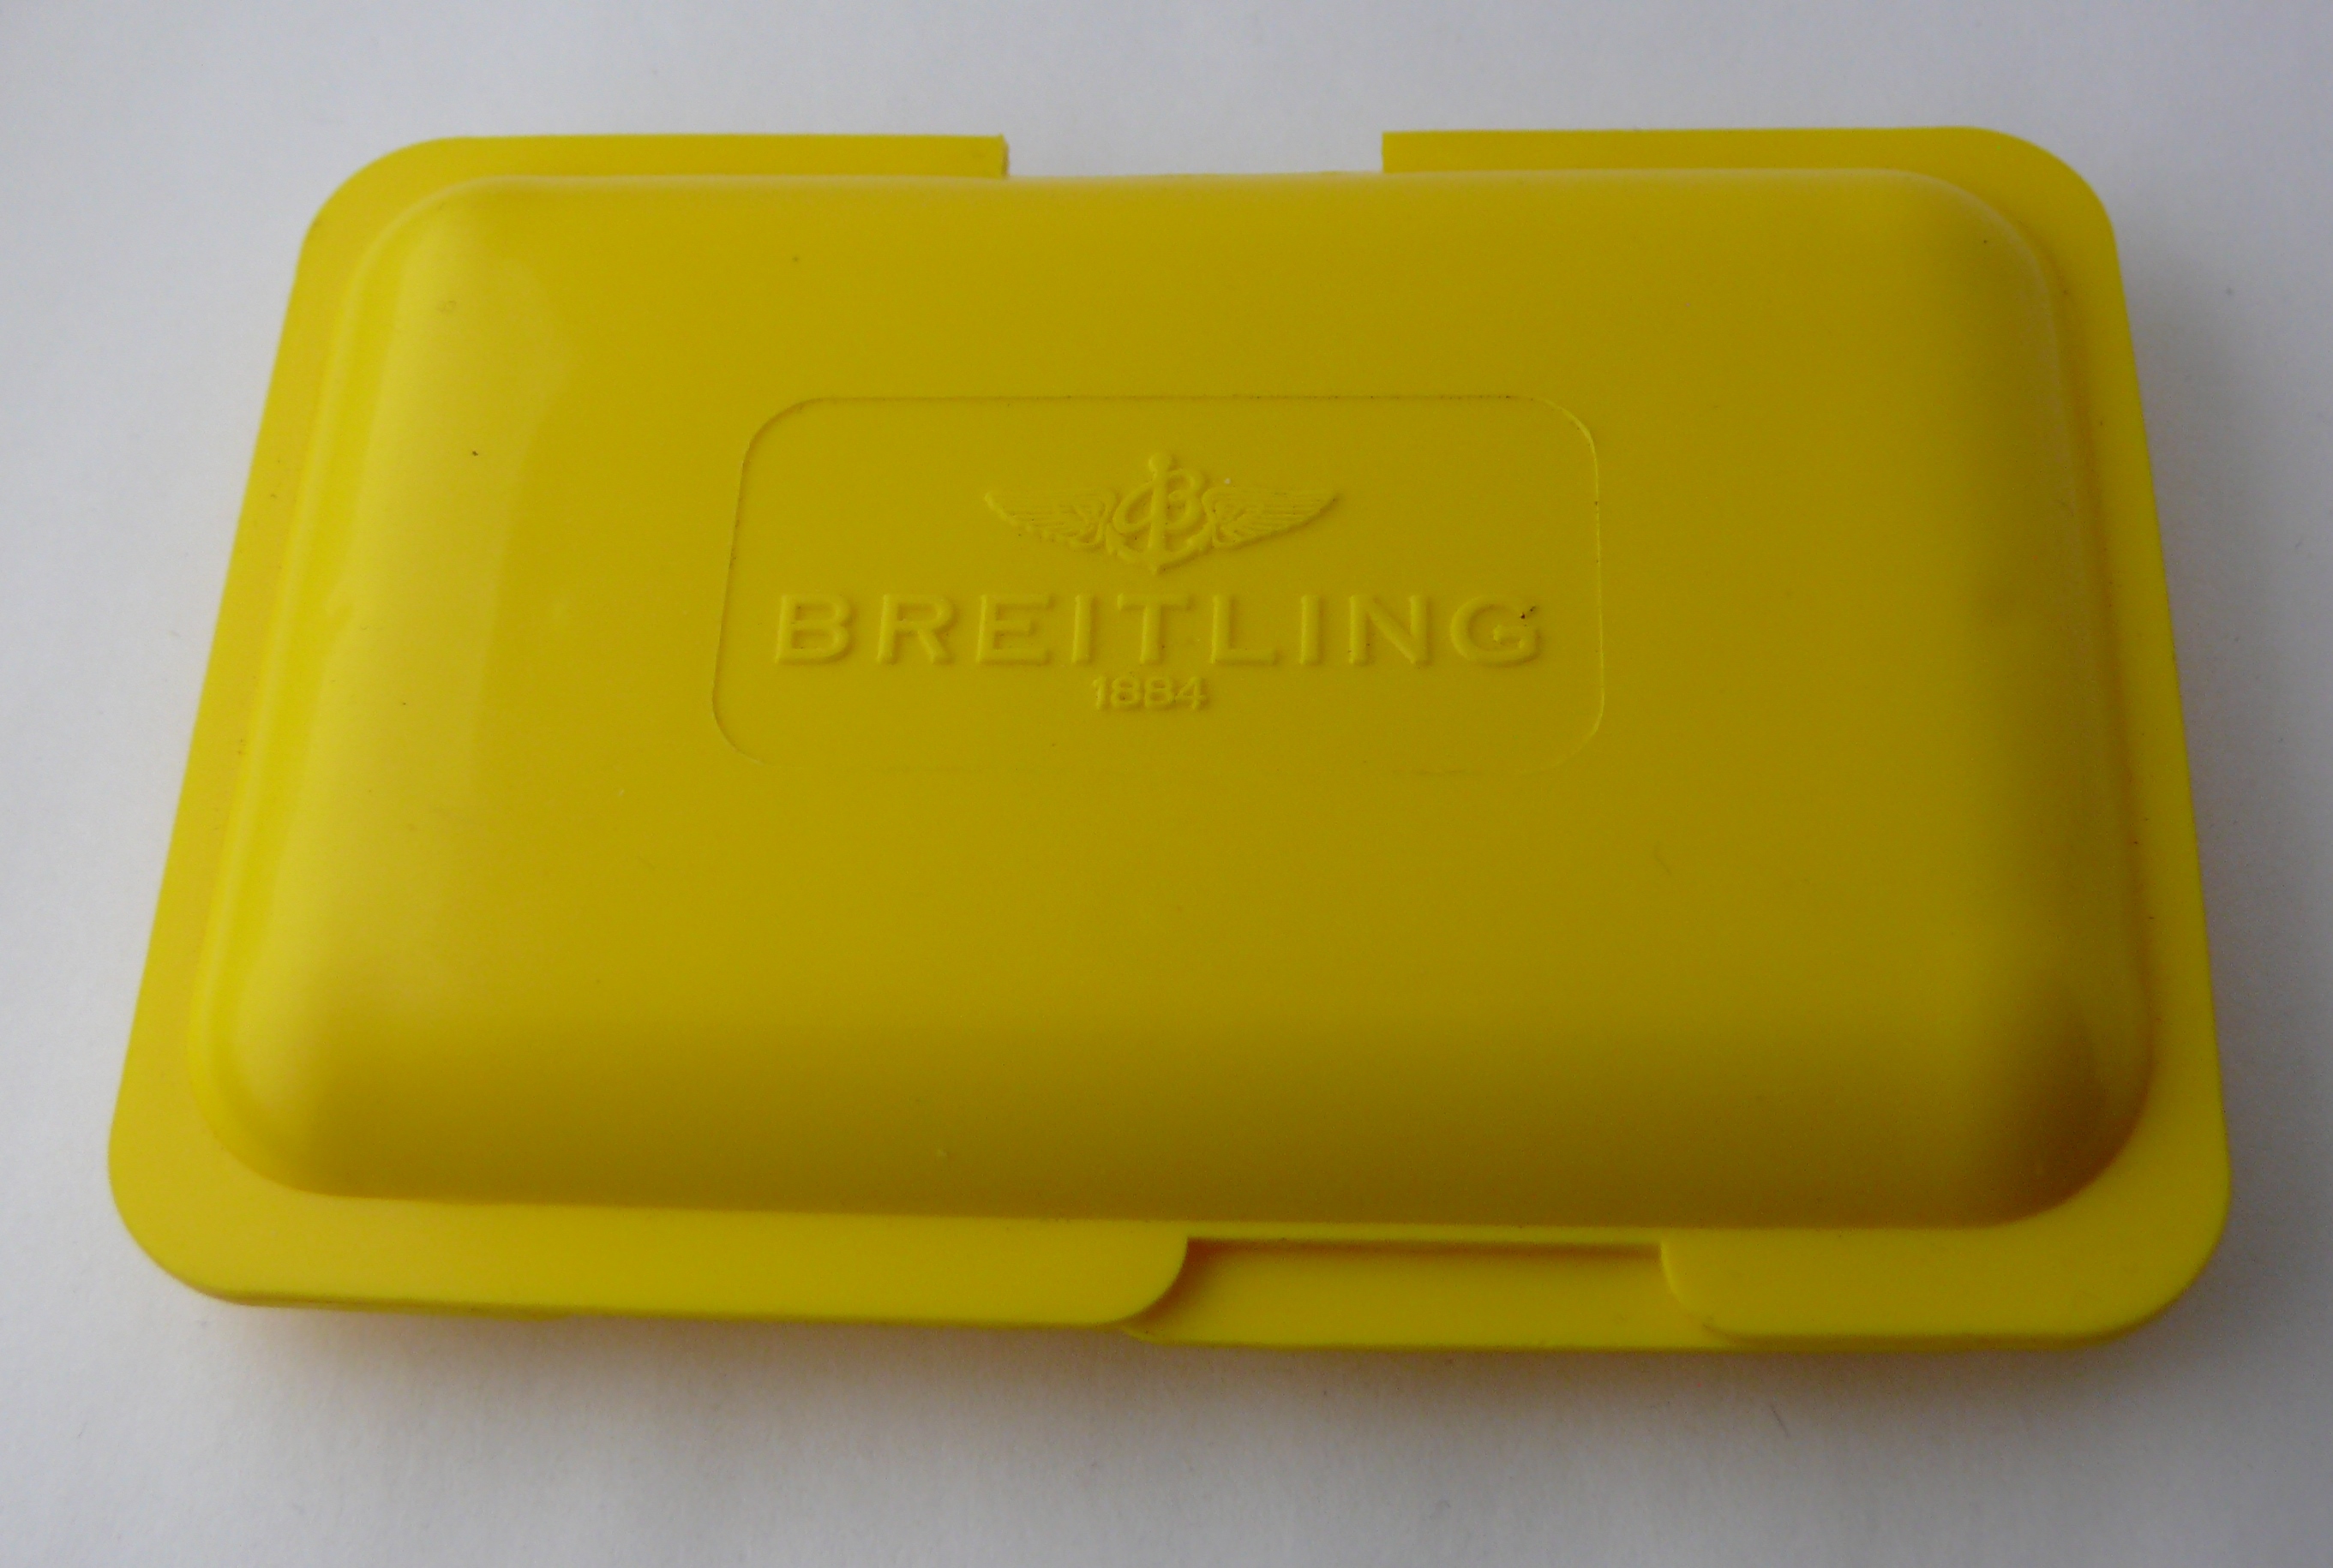 Vintage Breitling Parts Box. Box is clean with some marks that commensurate general wear.